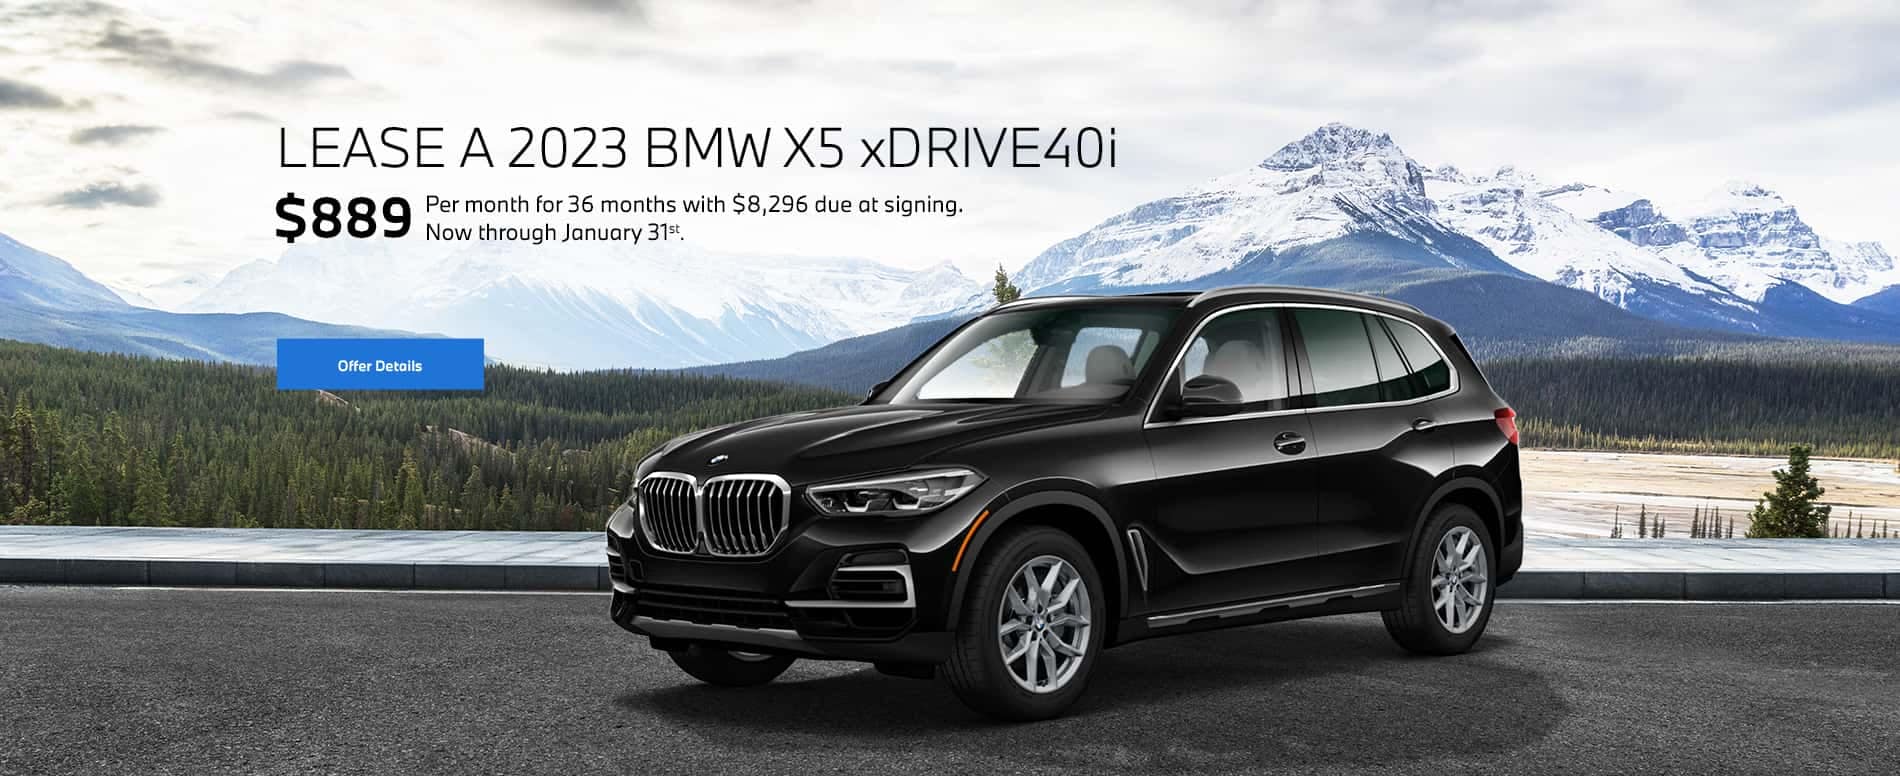 2023 X5 lease starting at $889 per month for 36 months